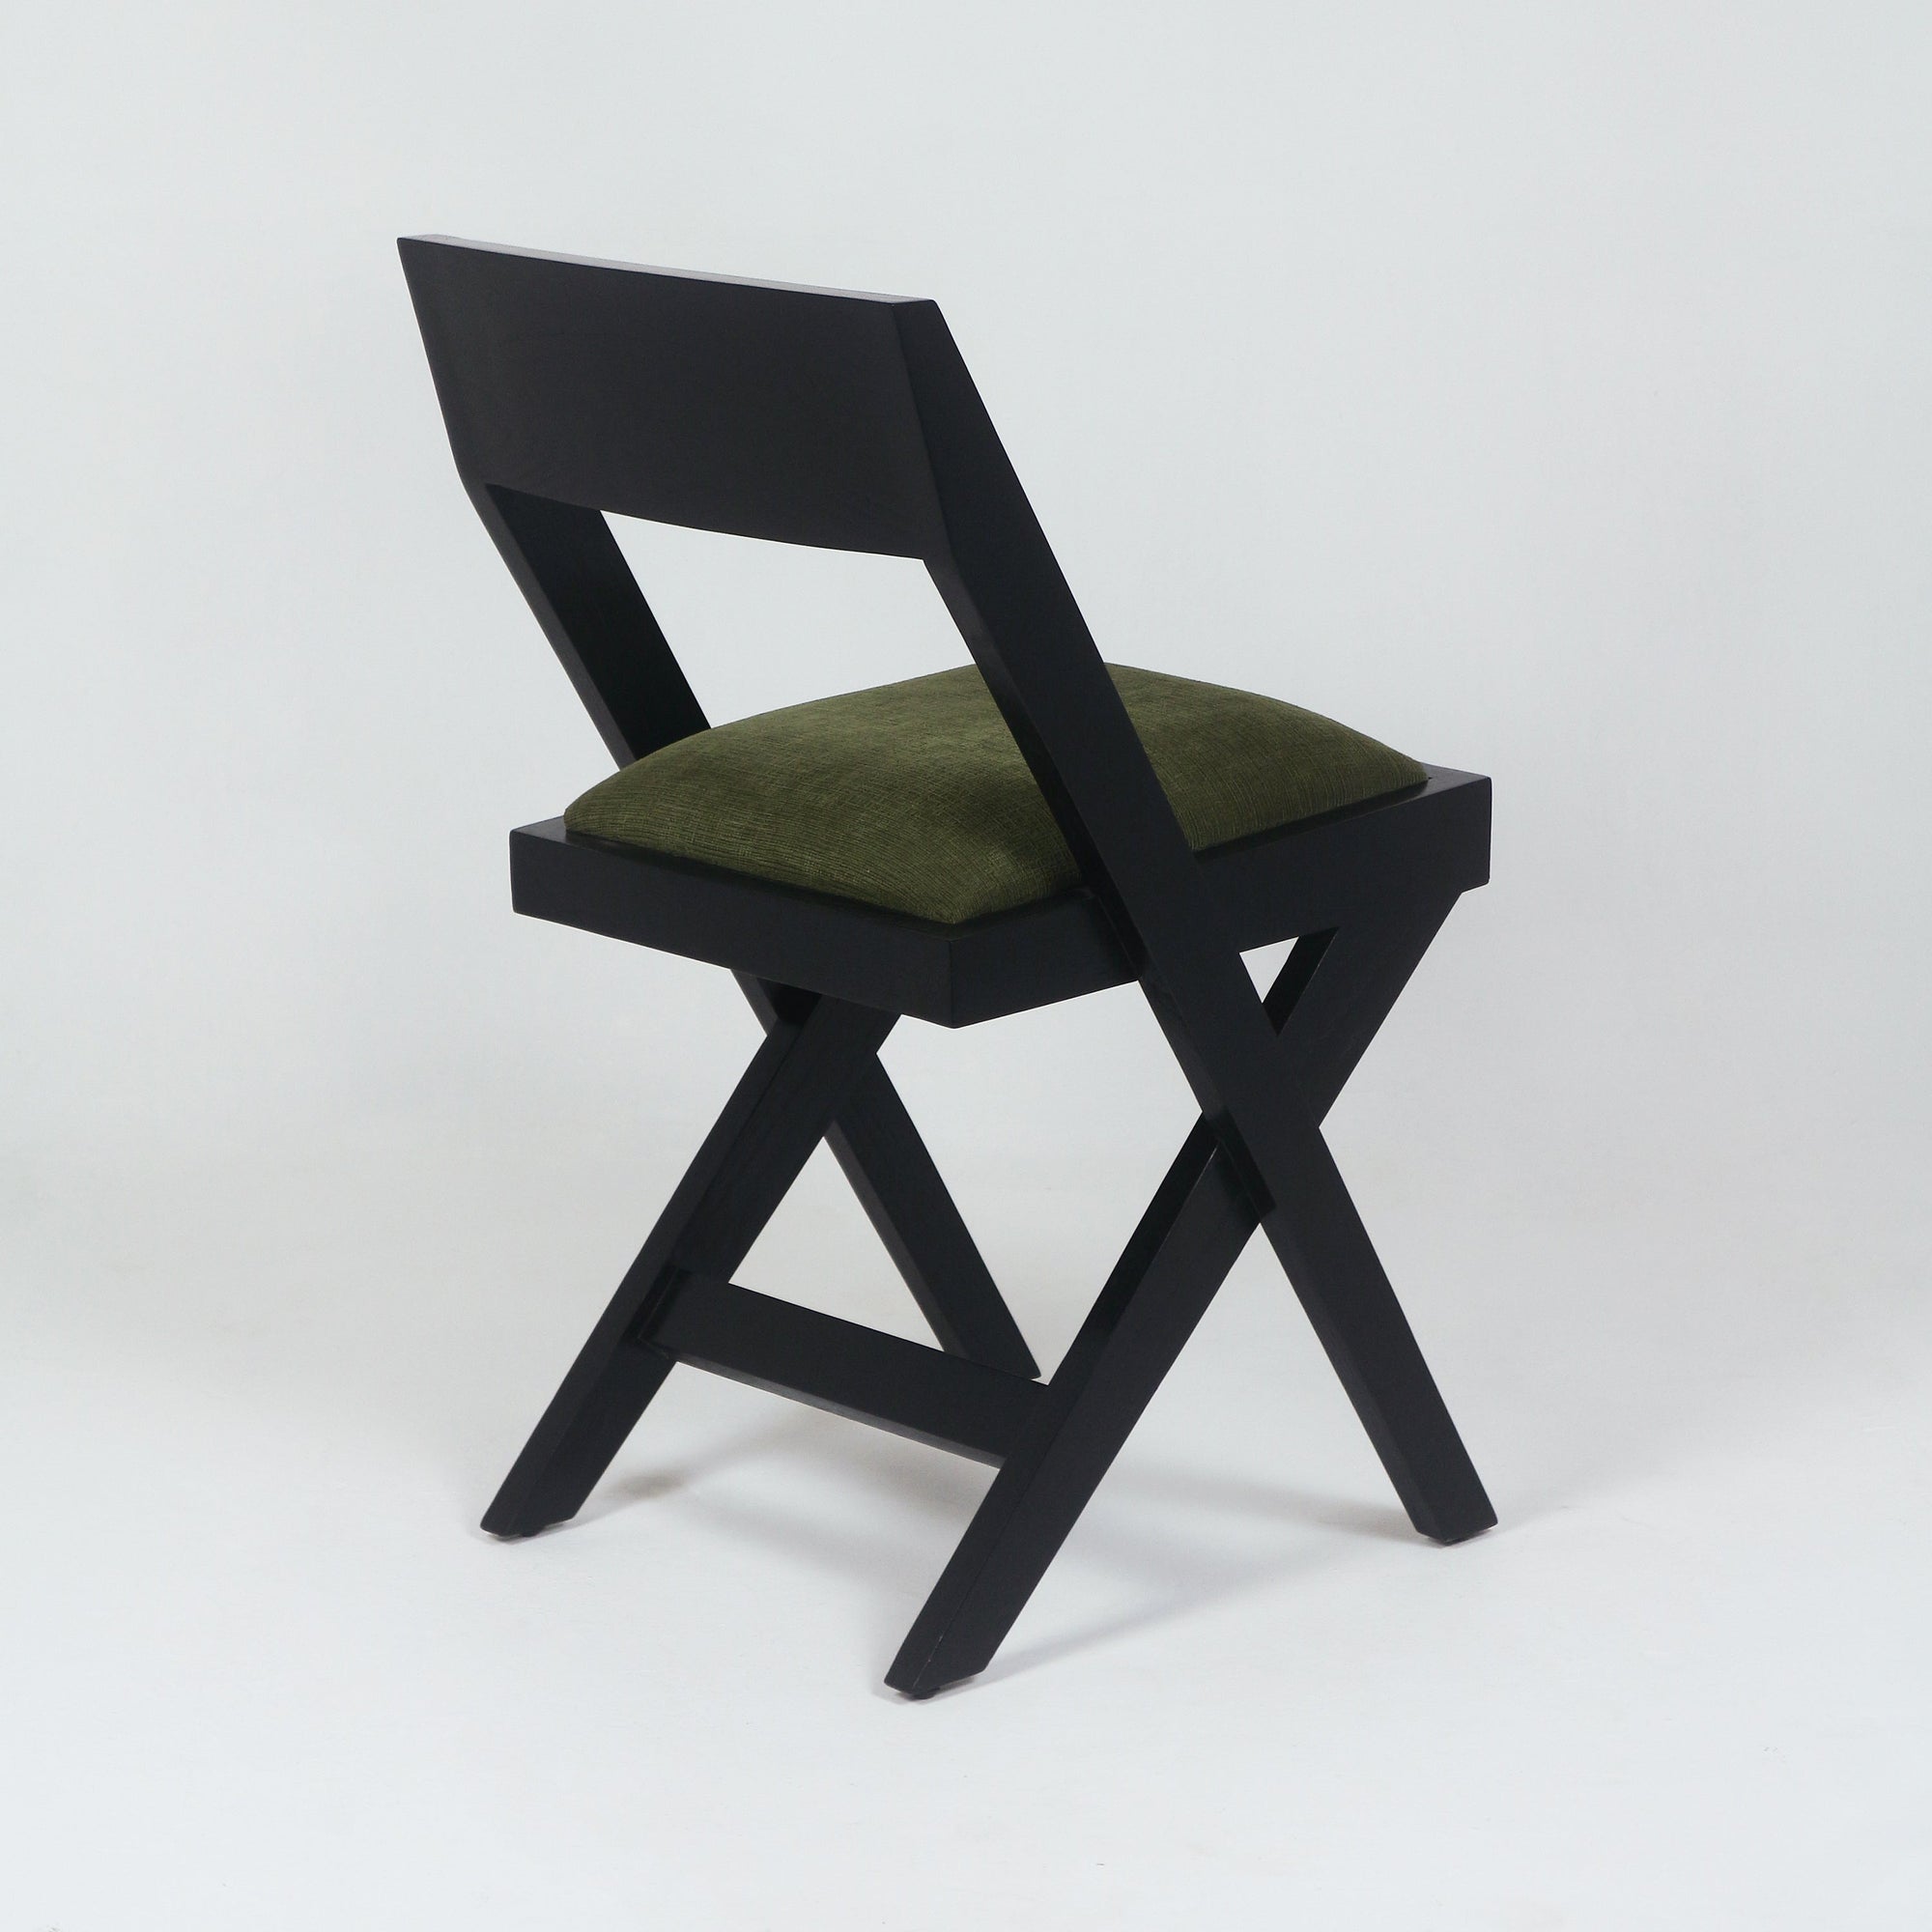 Solid Ash Jeanneret Inspired Library / Dining Chair